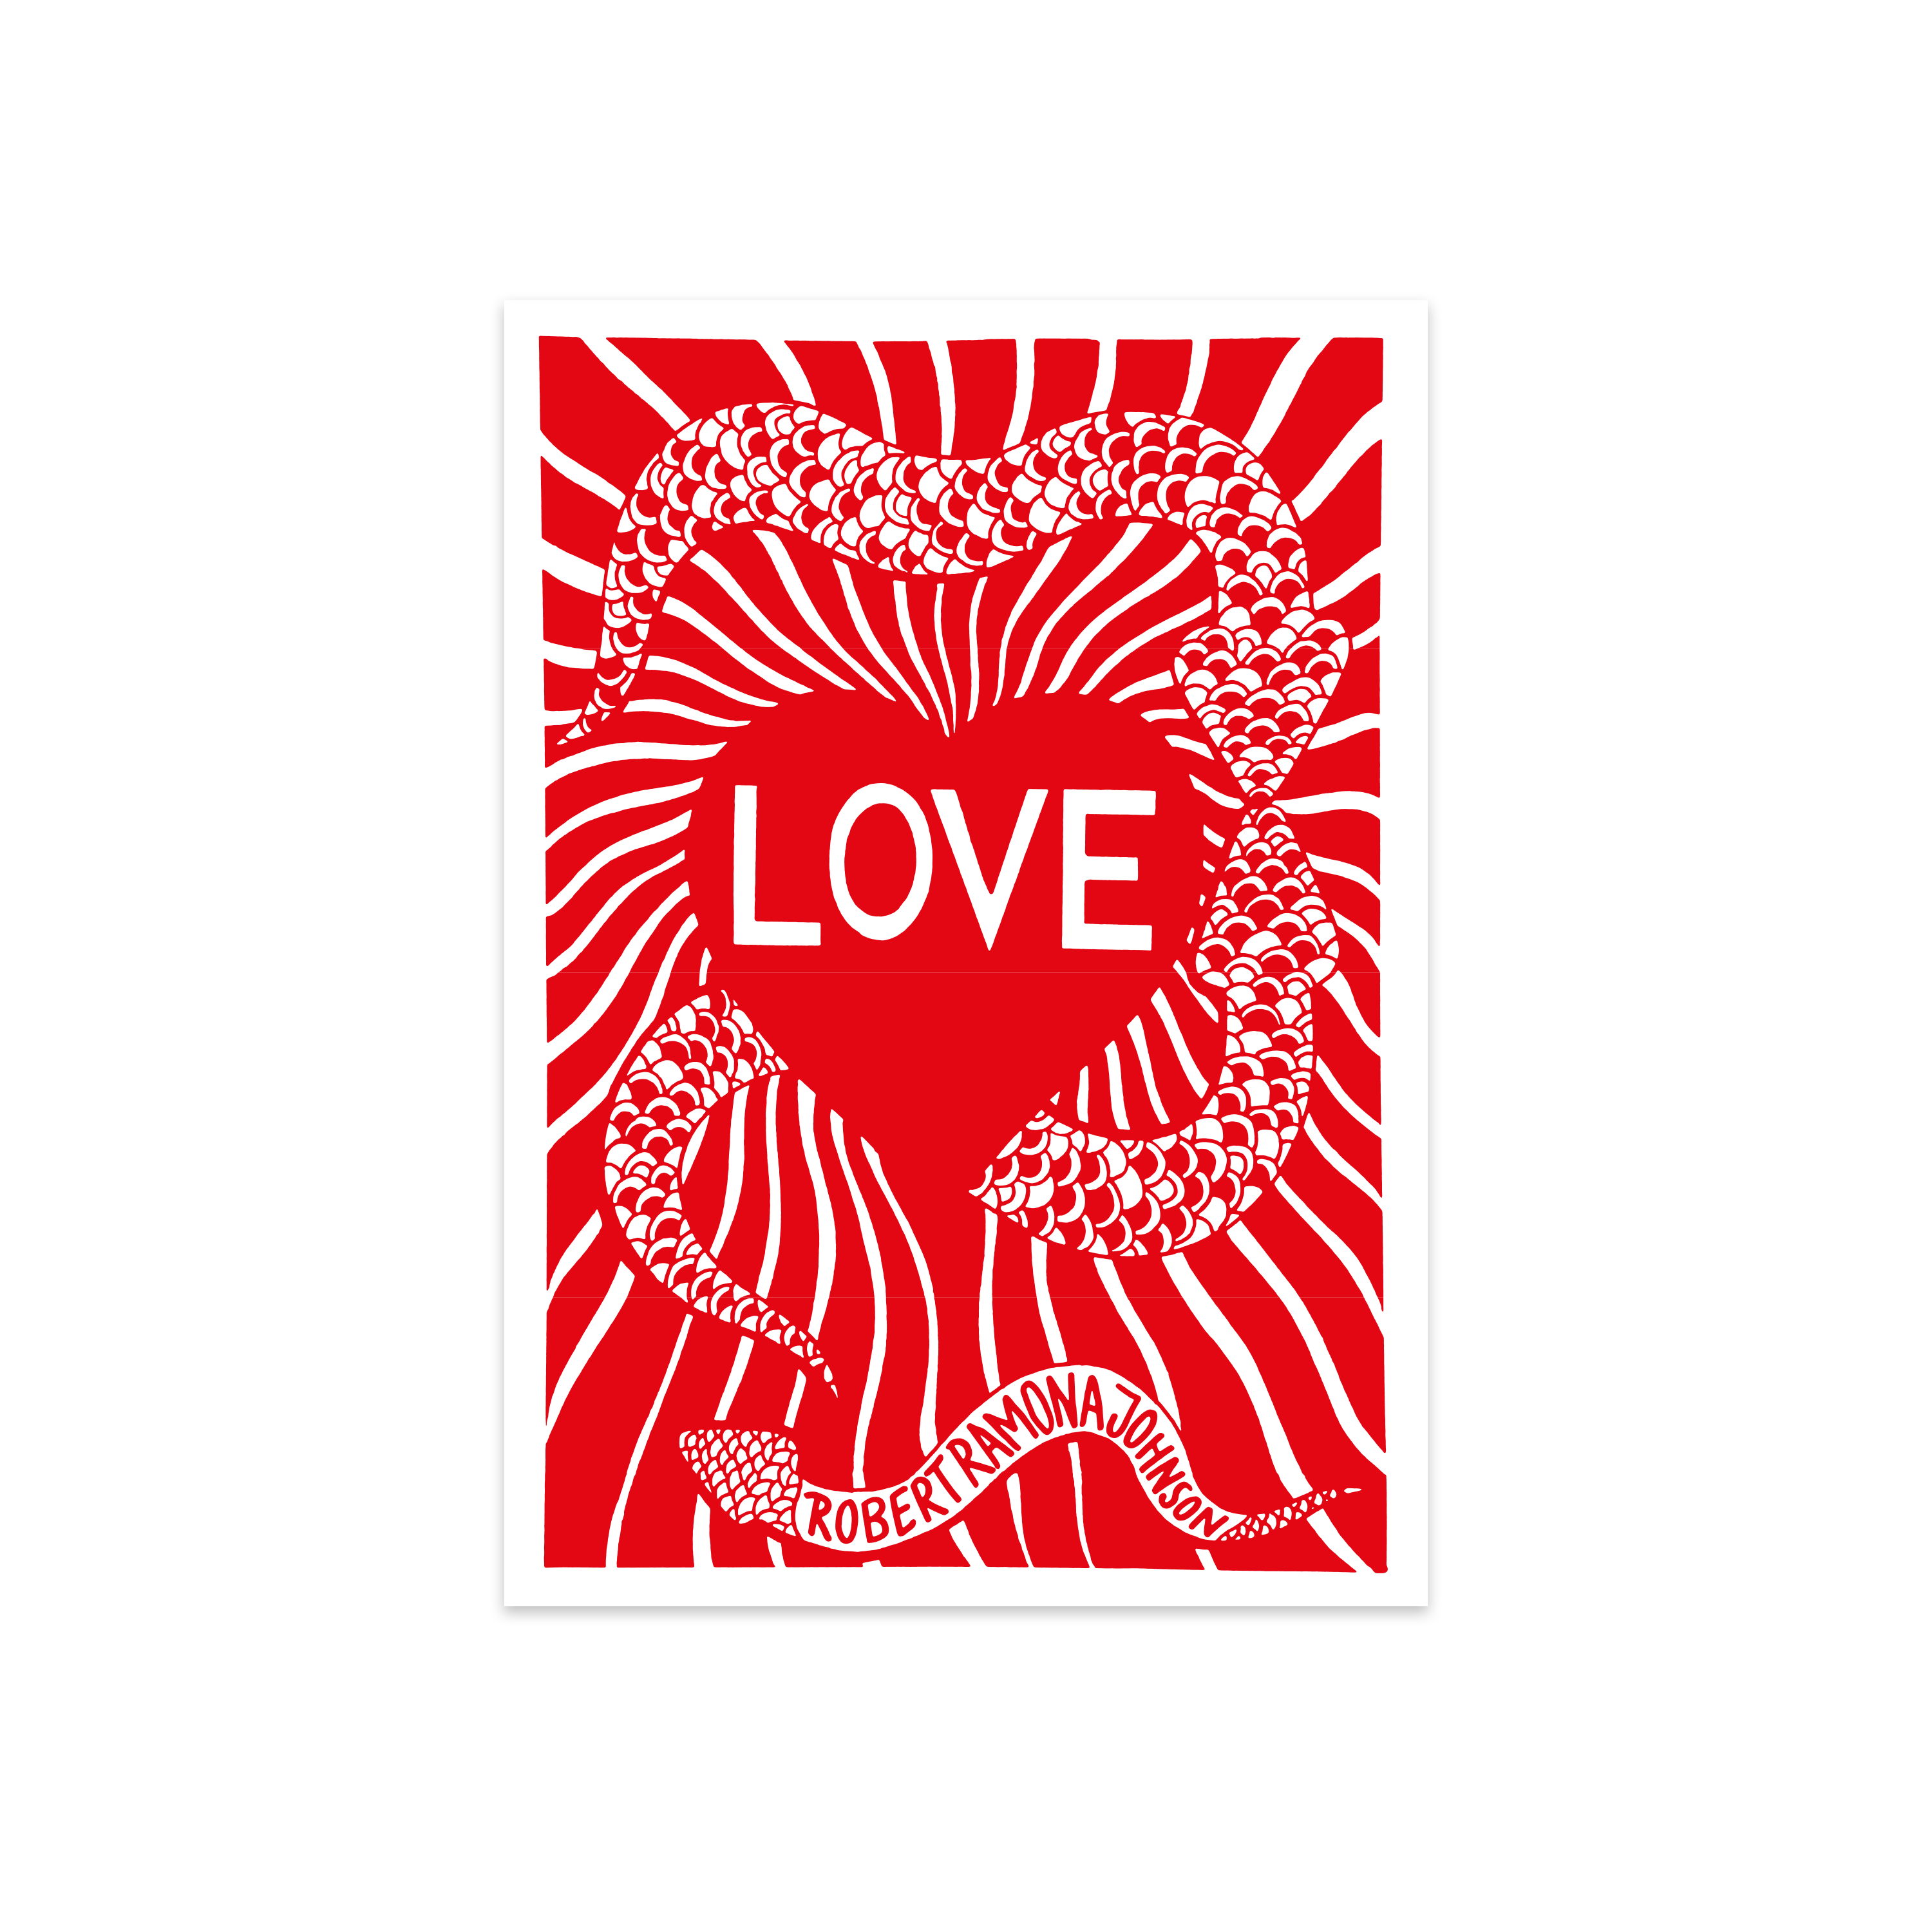 "Love" - Poster - Red Edition